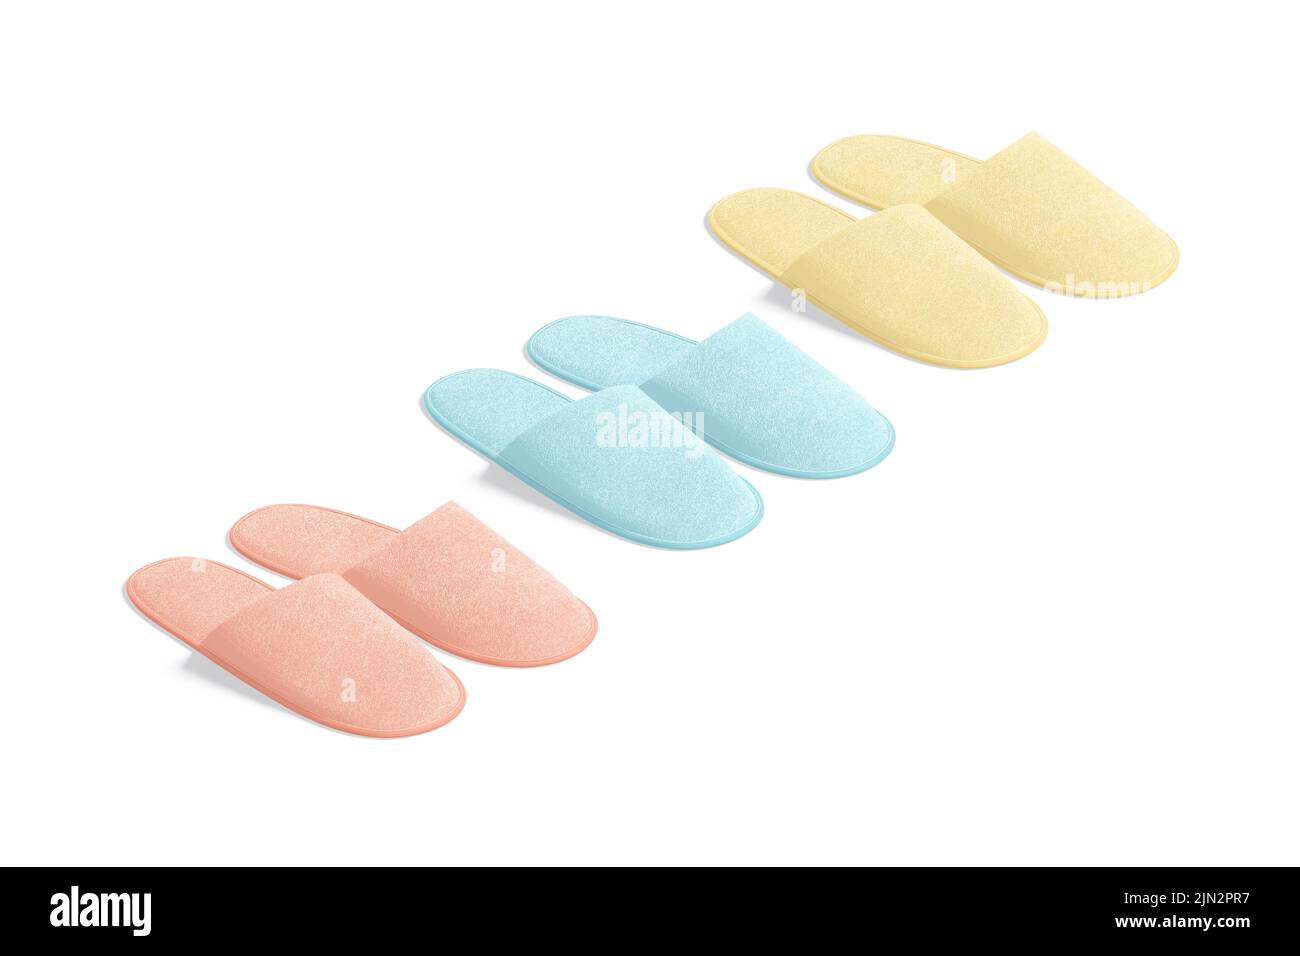 Blank colored home slippers mockup, side view Stock Photo